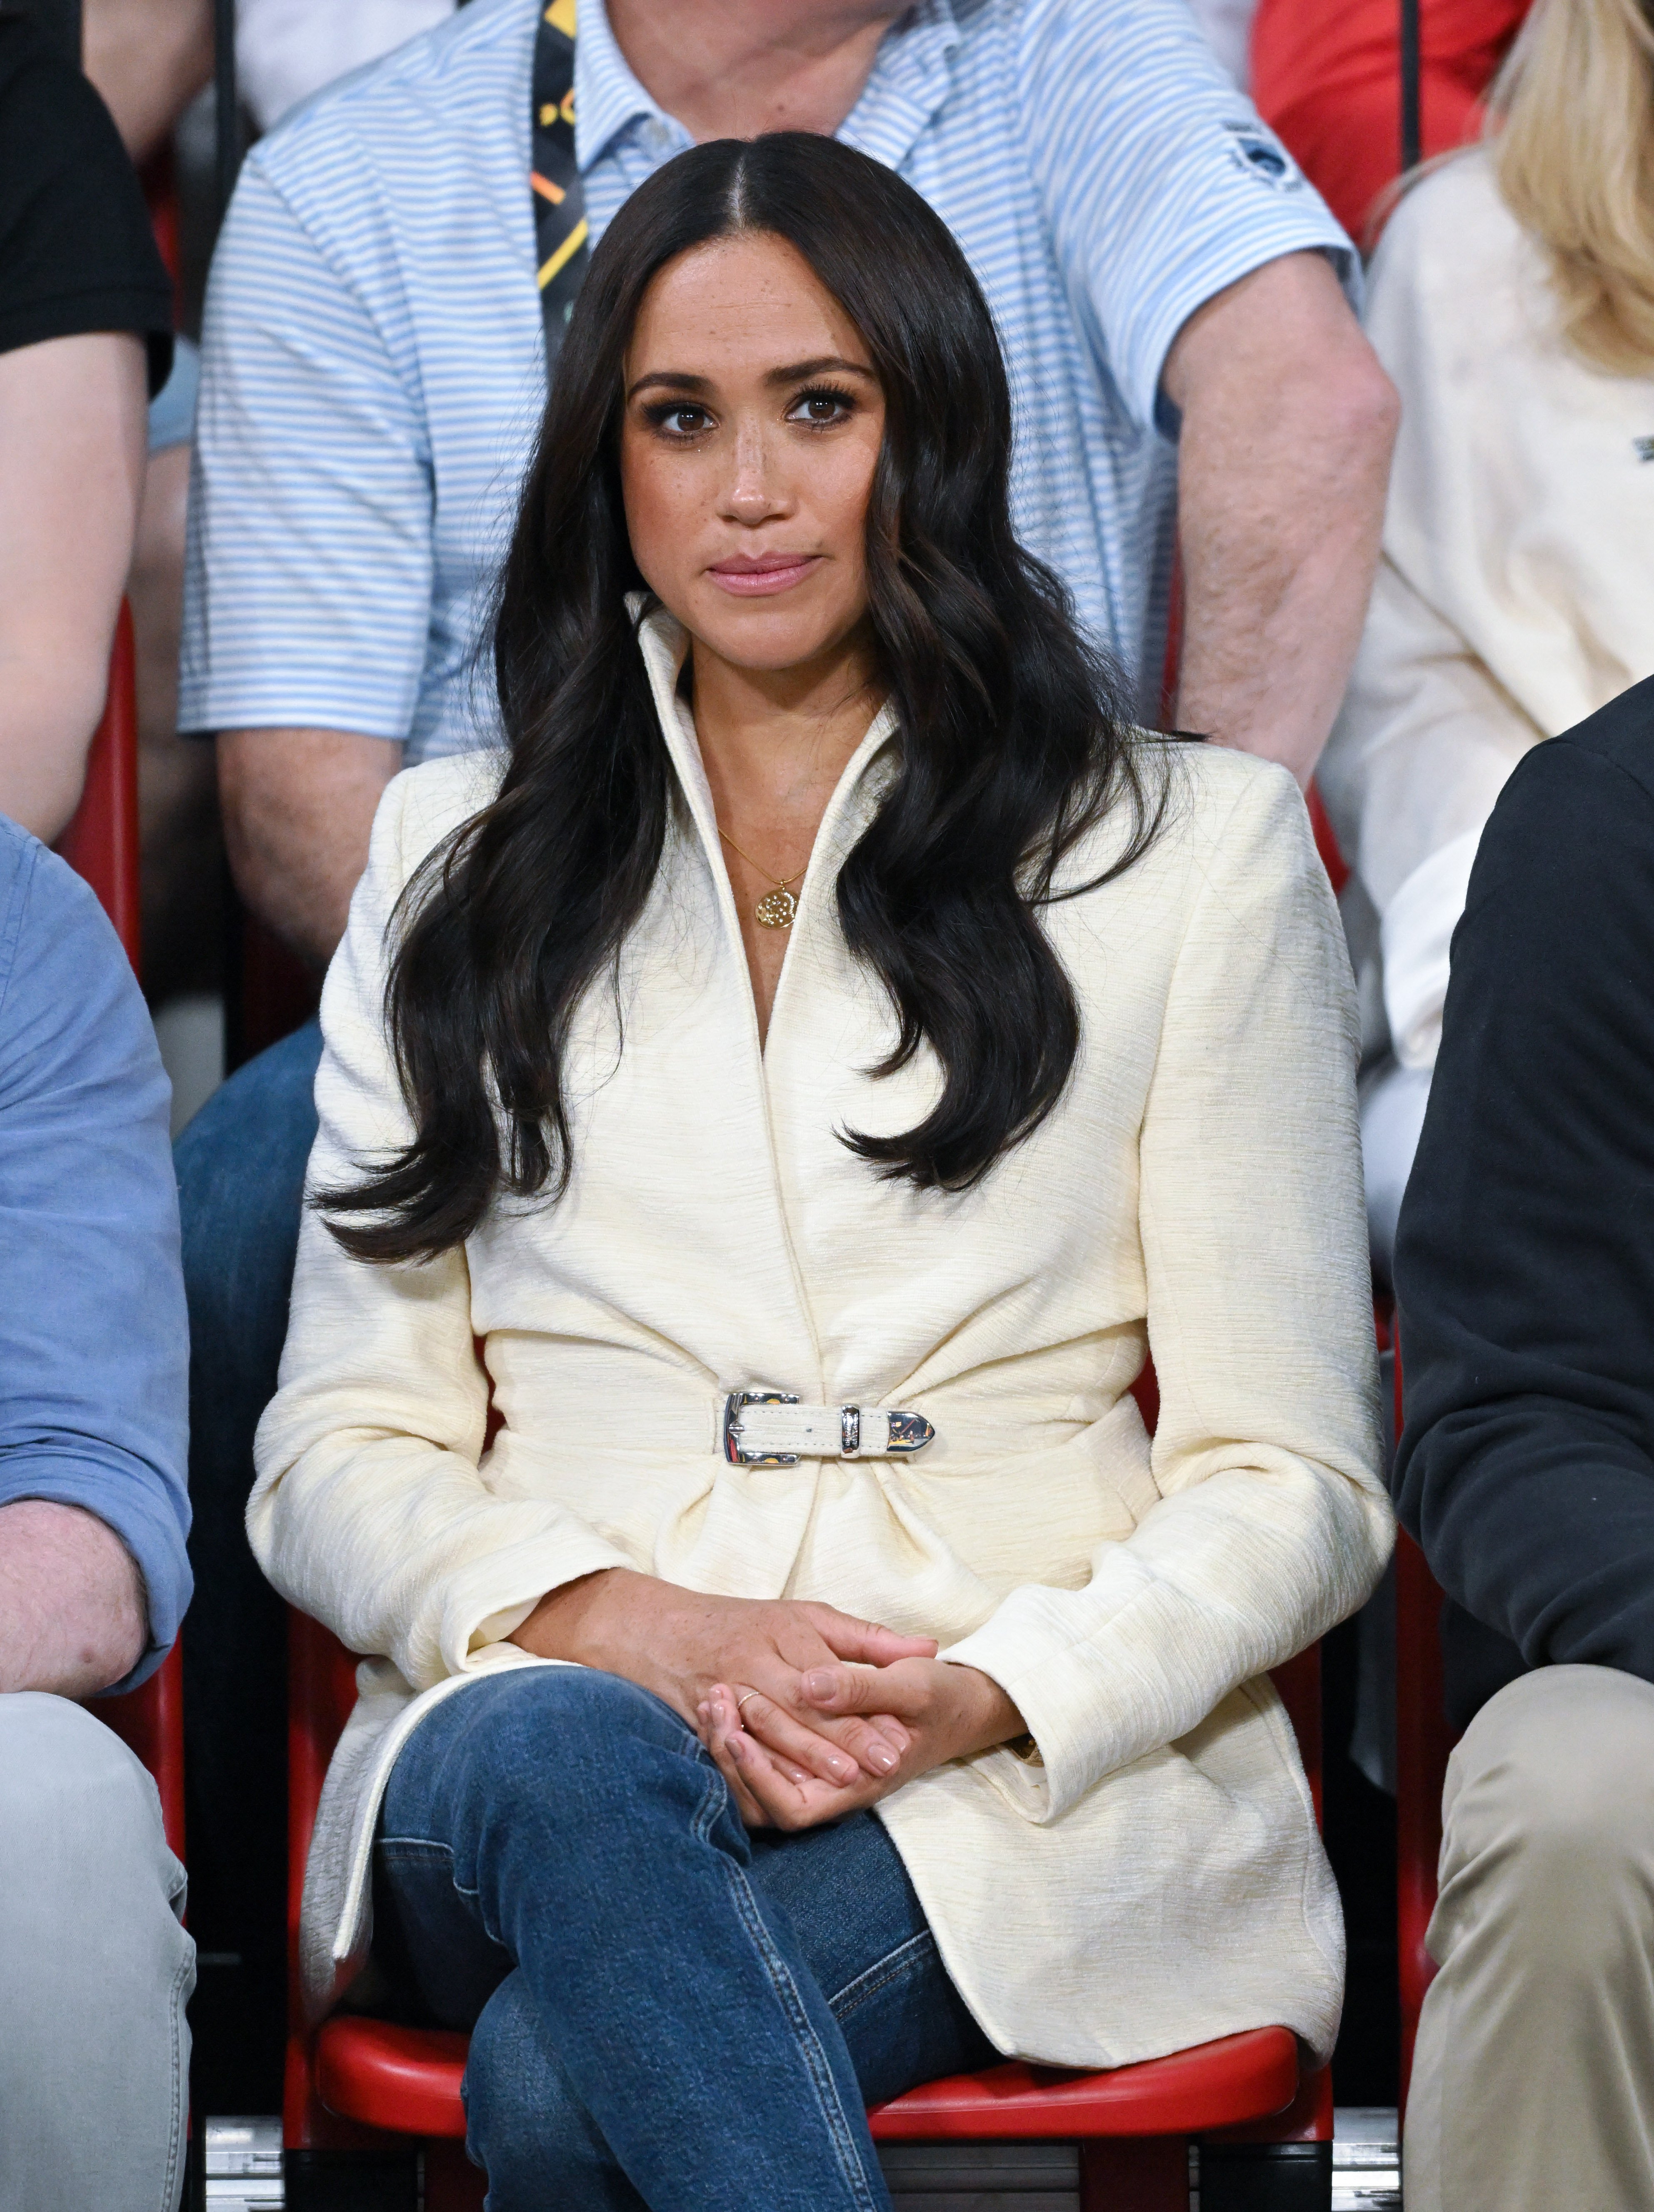 Meghan, Duchess of Sussex watches the sitting volley ball competition on day 2 of the Invictus Games 2020 at Zuiderpark on April 17, 2022 in The Hague, Netherlands | Source: Getty Images